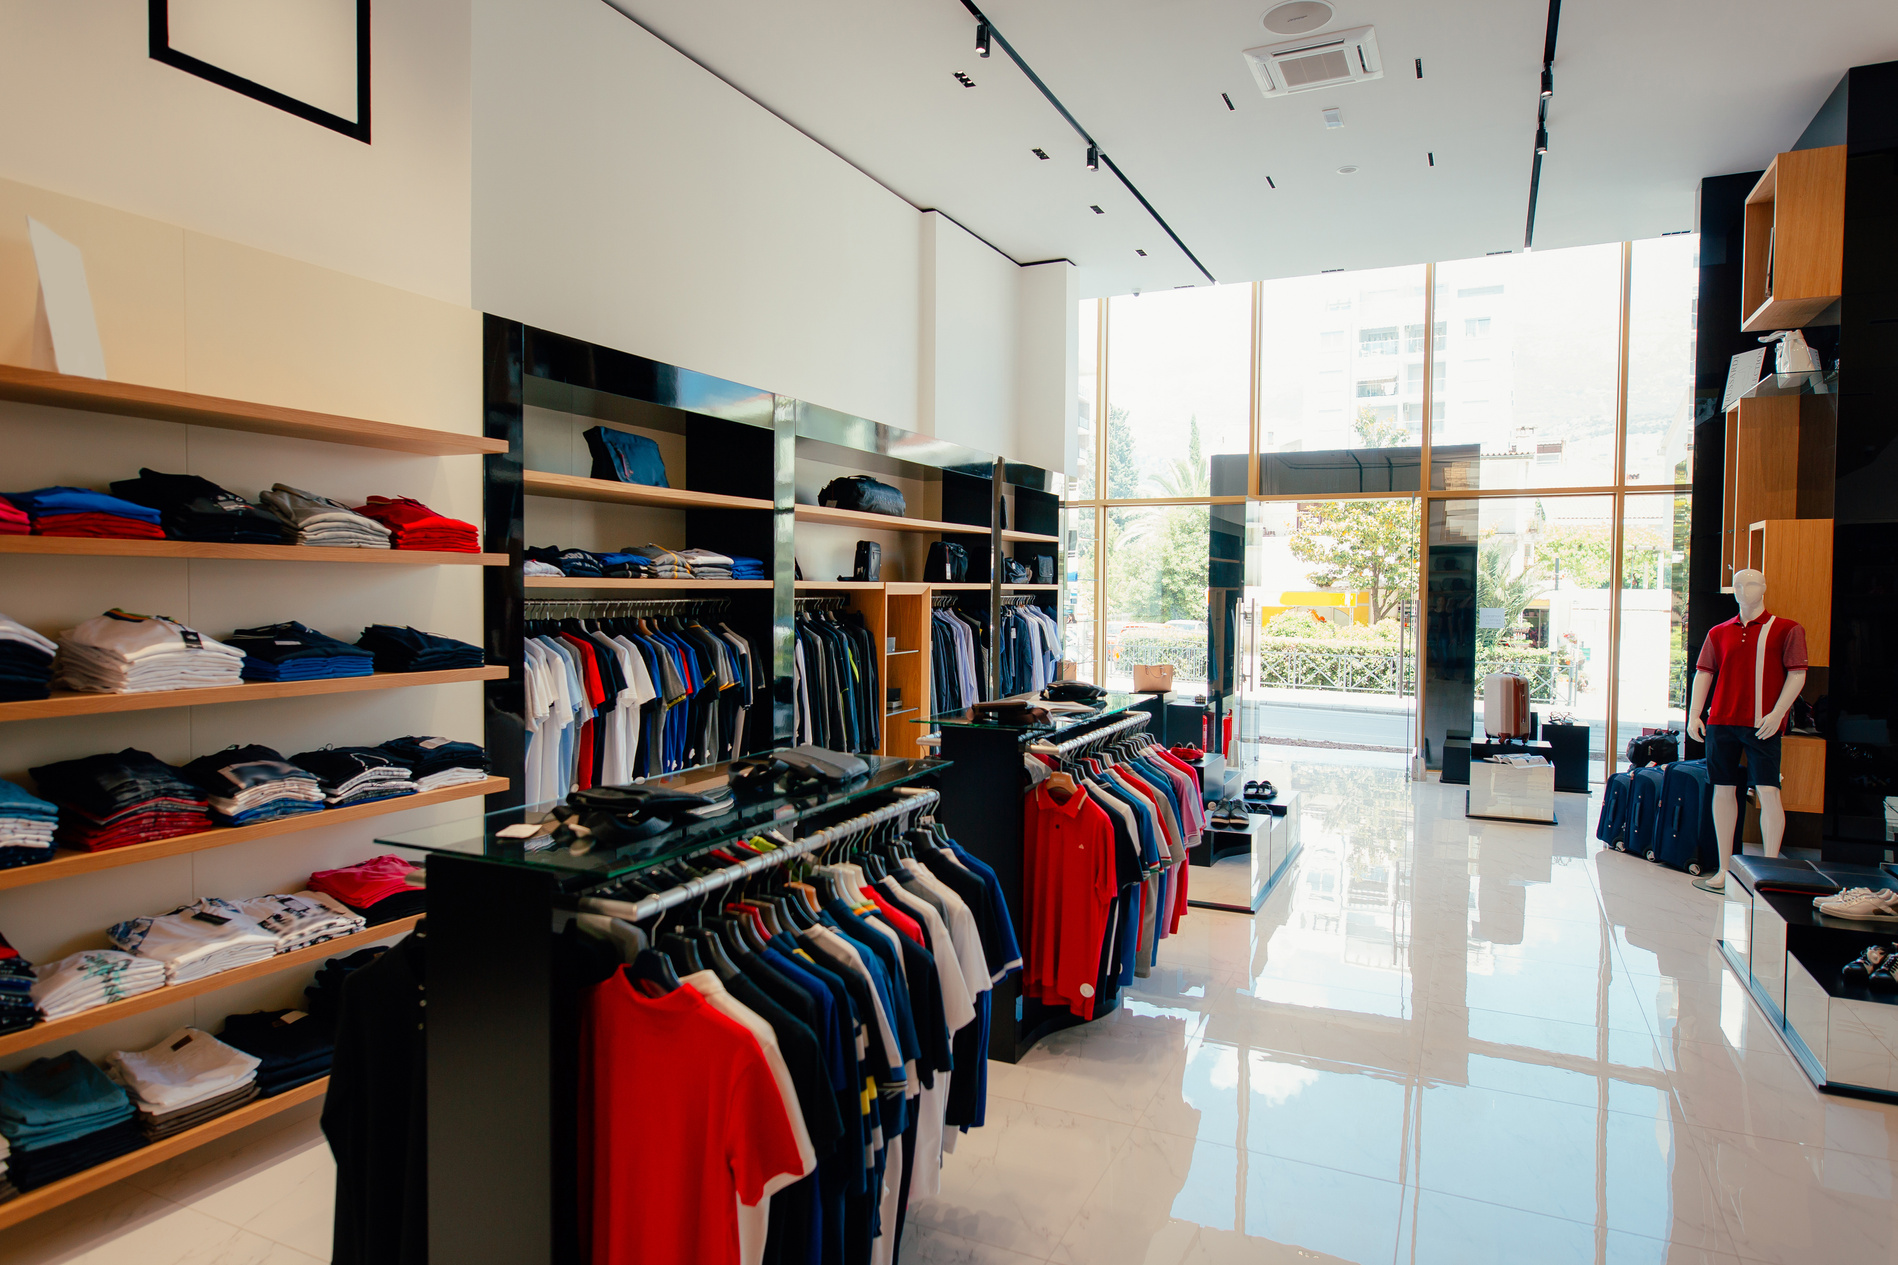 Interior of a Clothing Store. Clothing for Men and Women on the